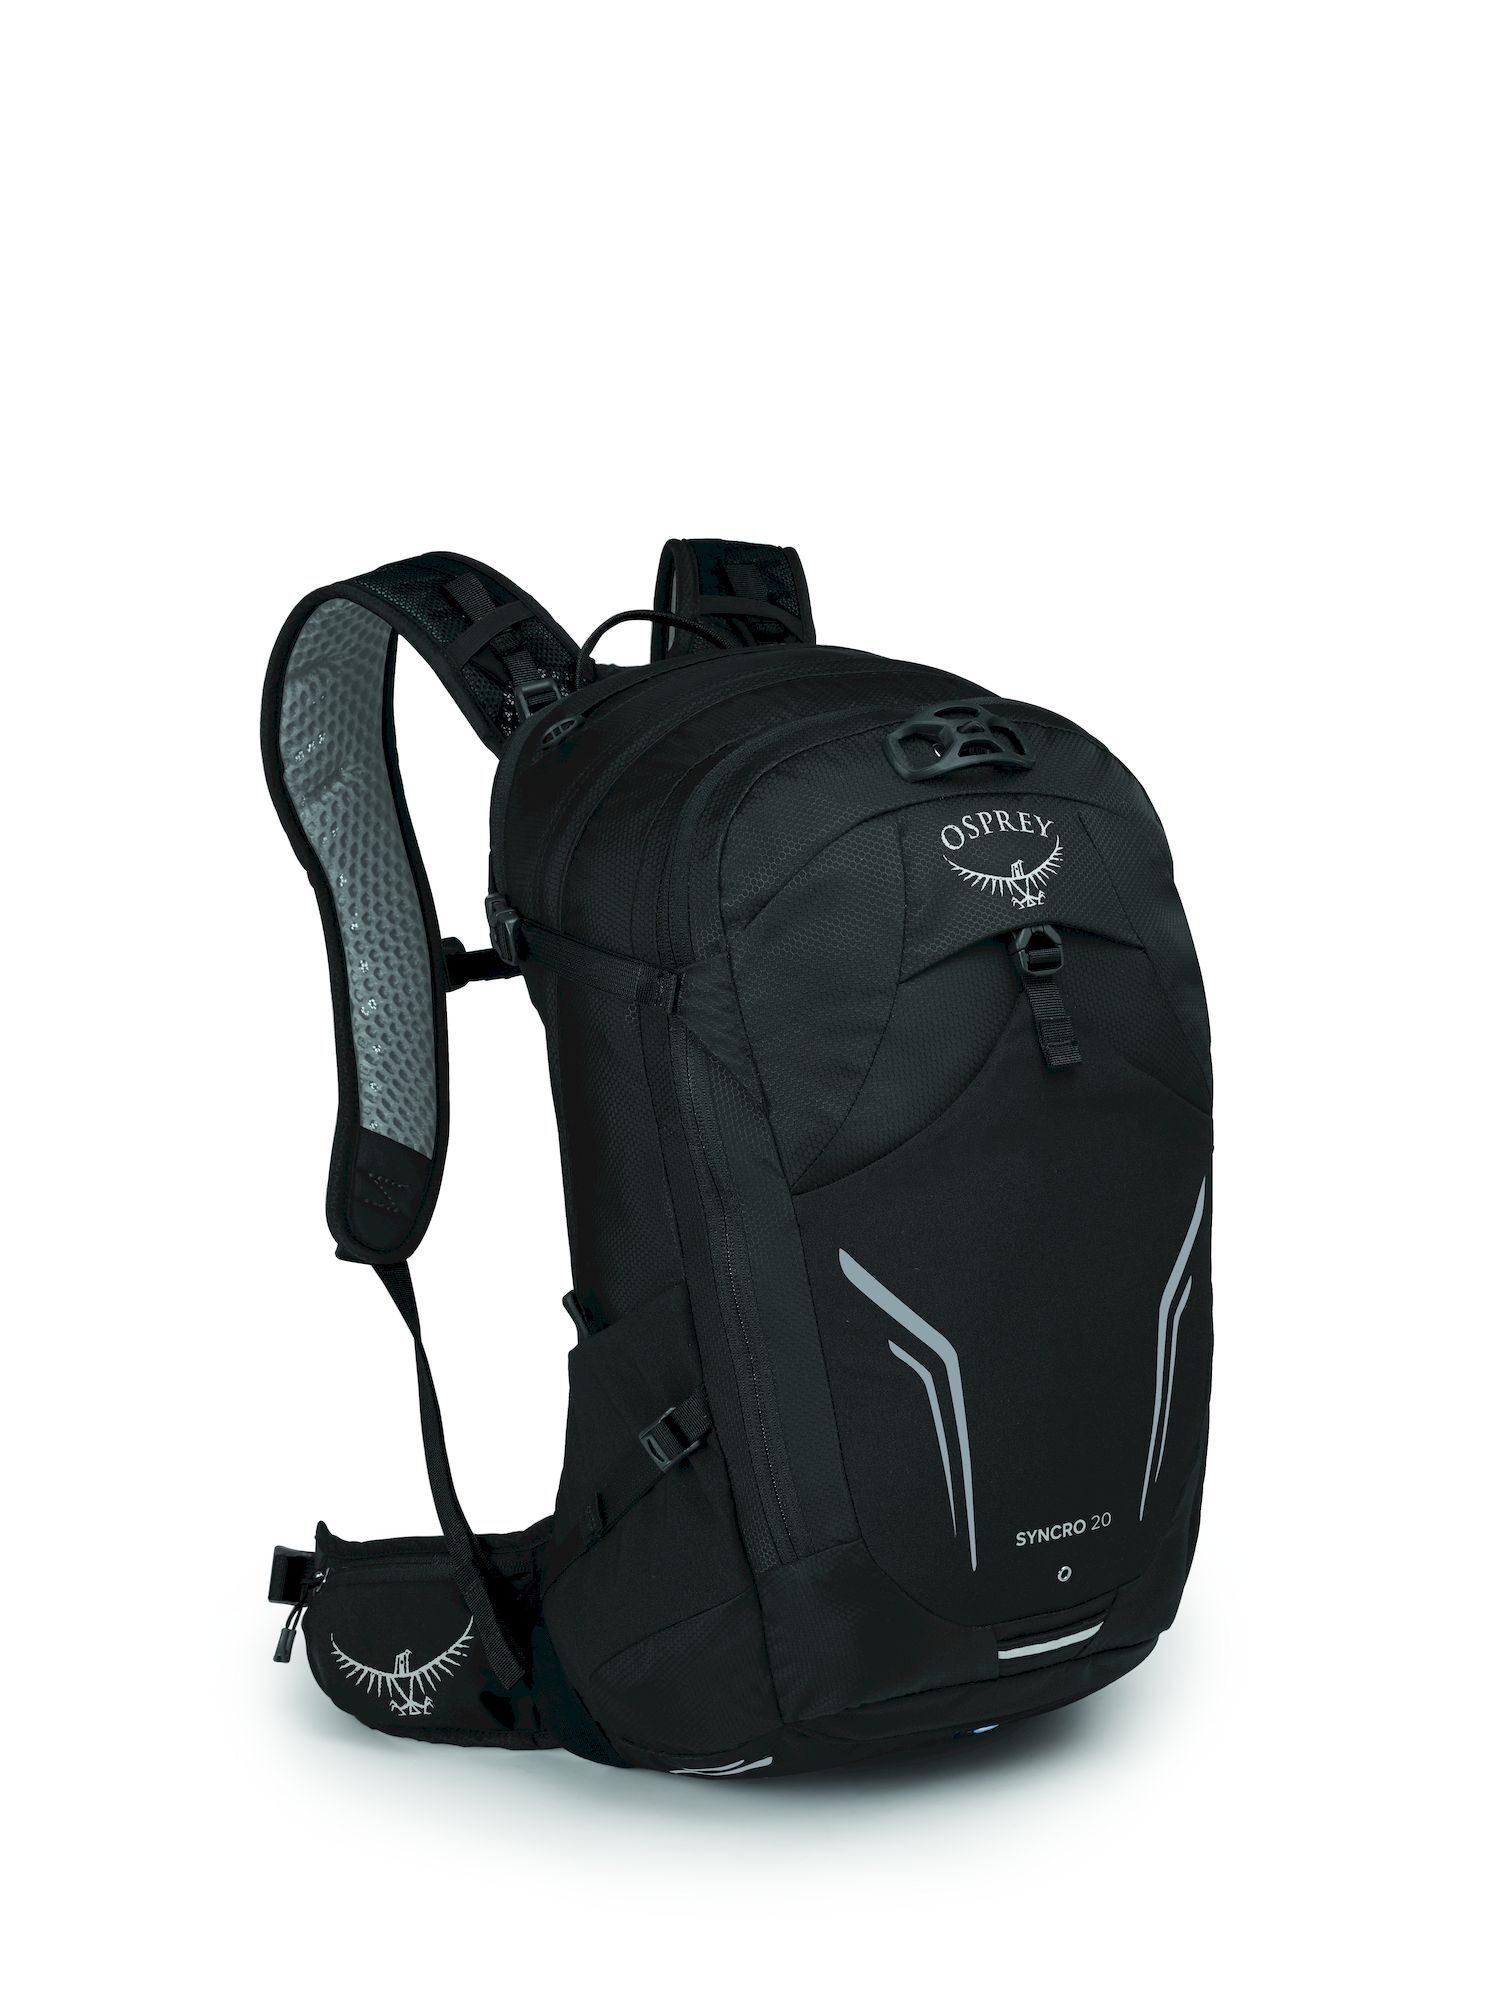 Osprey Syncro 20 - Cycling backpack - Men's